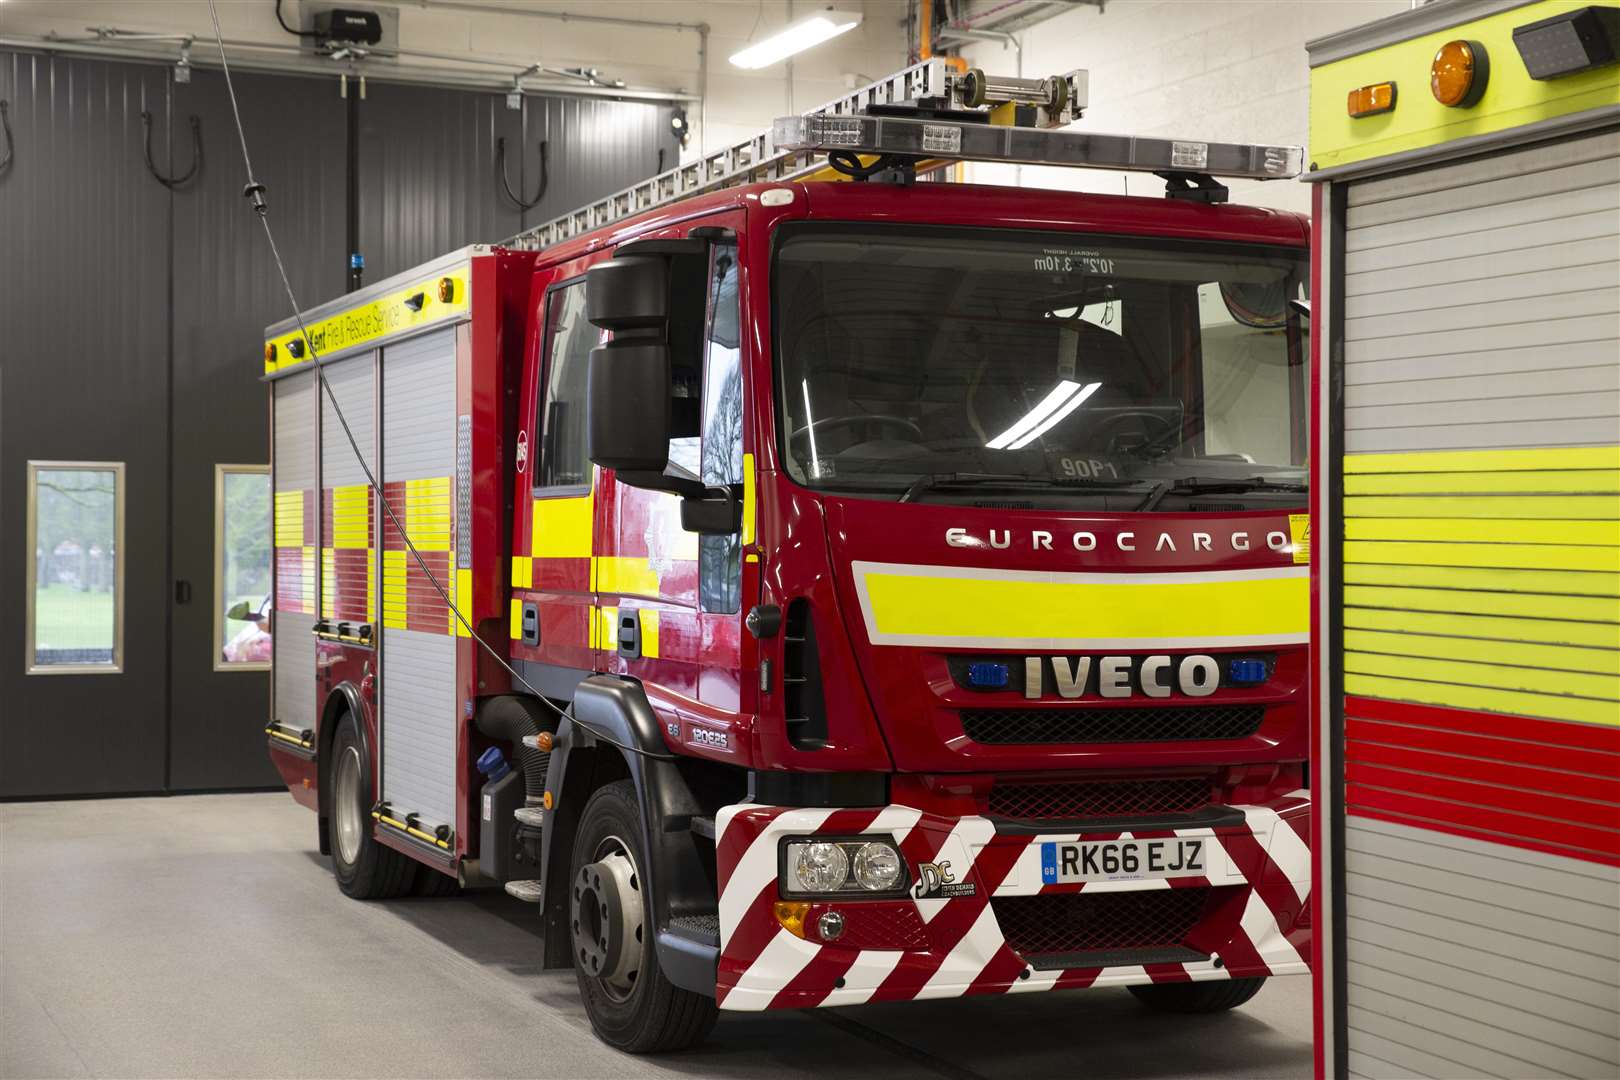 The multi-million pound station is said to bring firefighting training facilities right into the 21st century